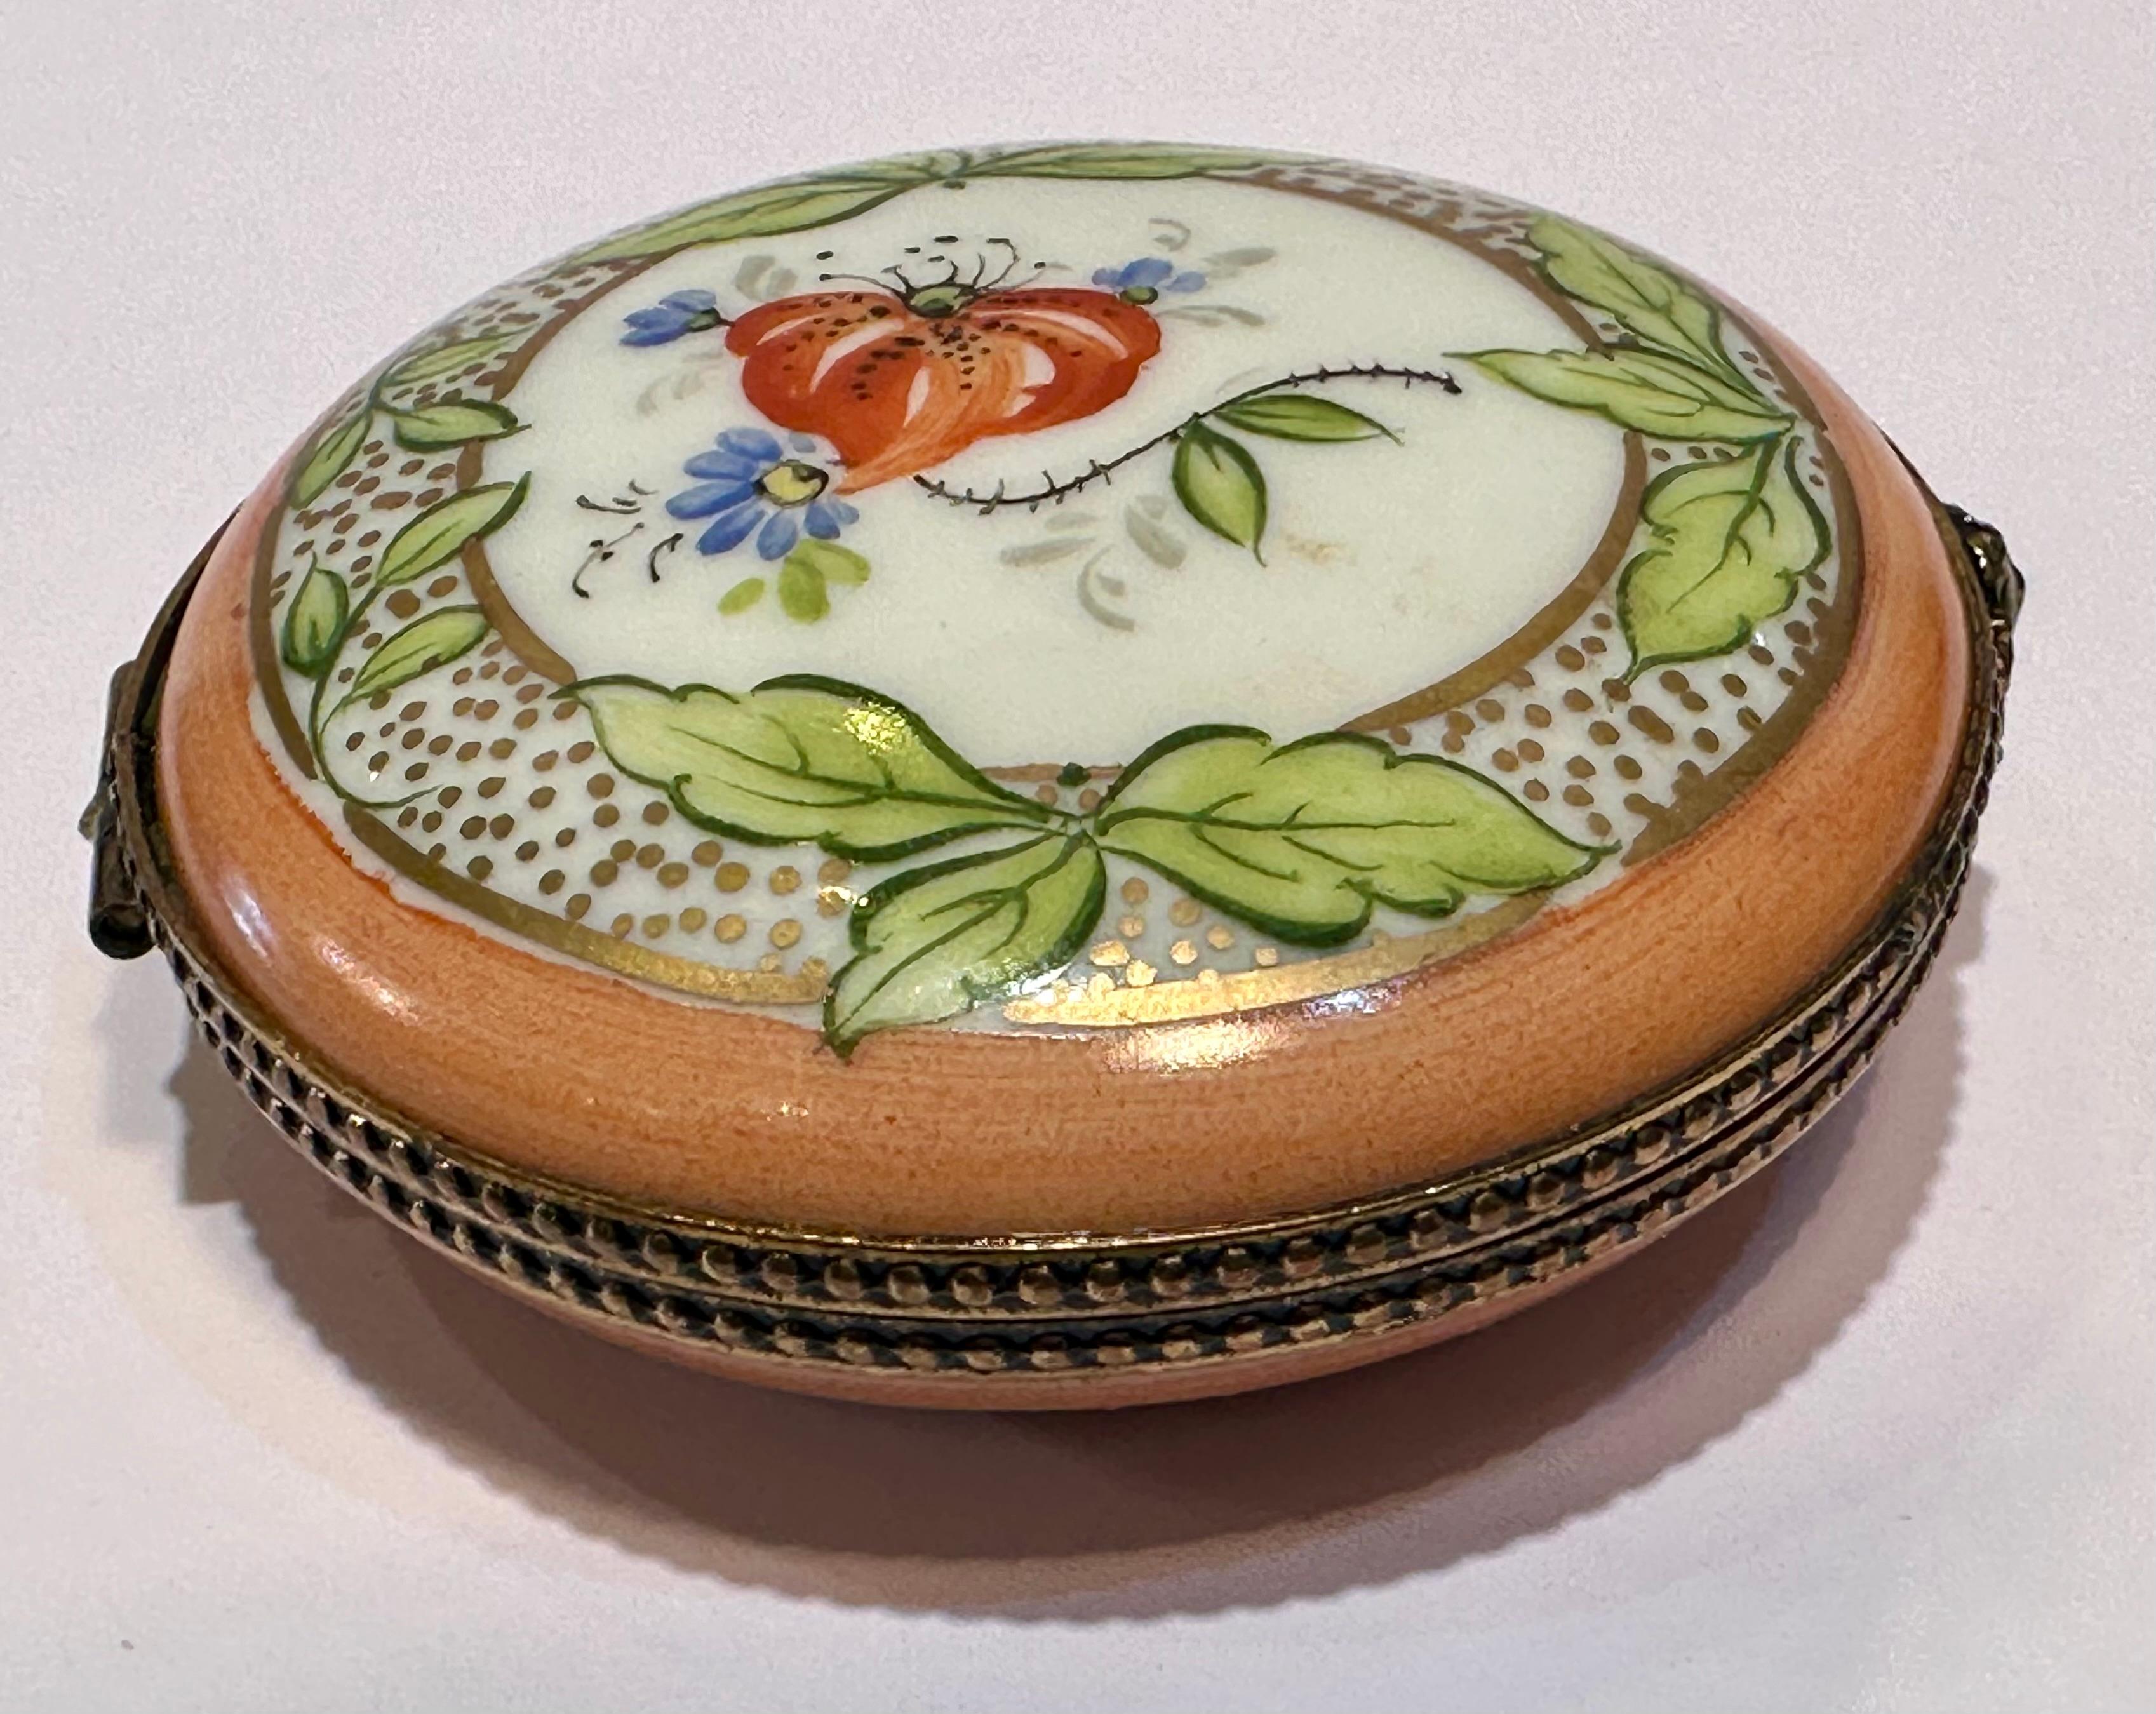 Beautiful Limoges France Hand Painted Porcelain Circular Shaped Trinket Box  In Good Condition For Sale In Tustin, CA